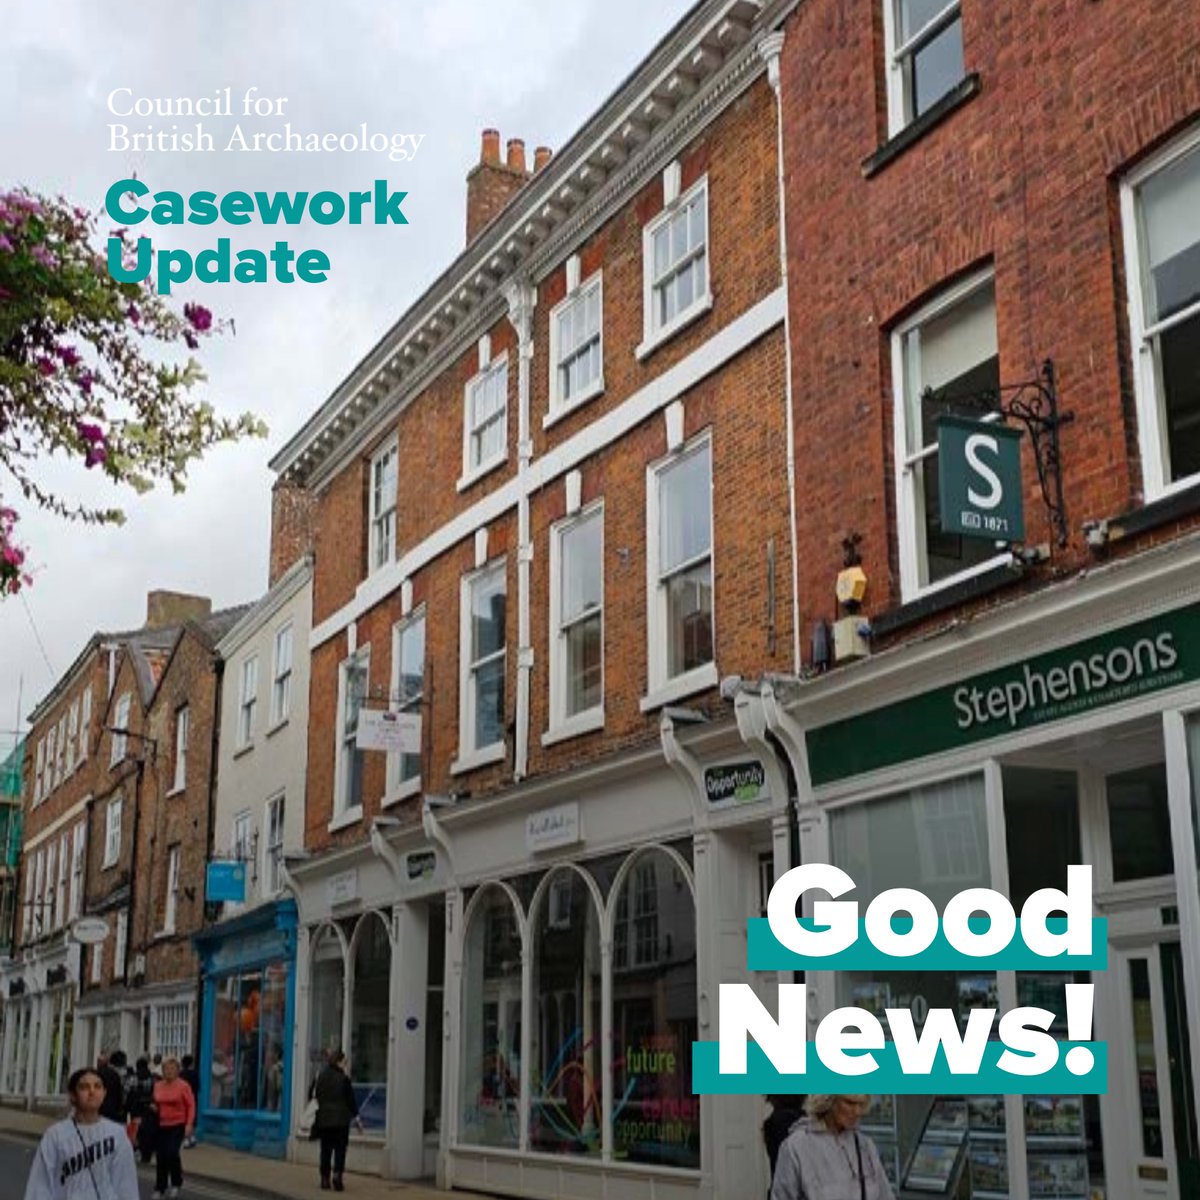 A pair of houses in York from the 17th century are set for restoration. 🎉 By recognising the site's evolution and archaeological interest, the applicants have ensured minimal harm and a sustainable future. We look forward to seeing the project unfold! 👏 #Heritage